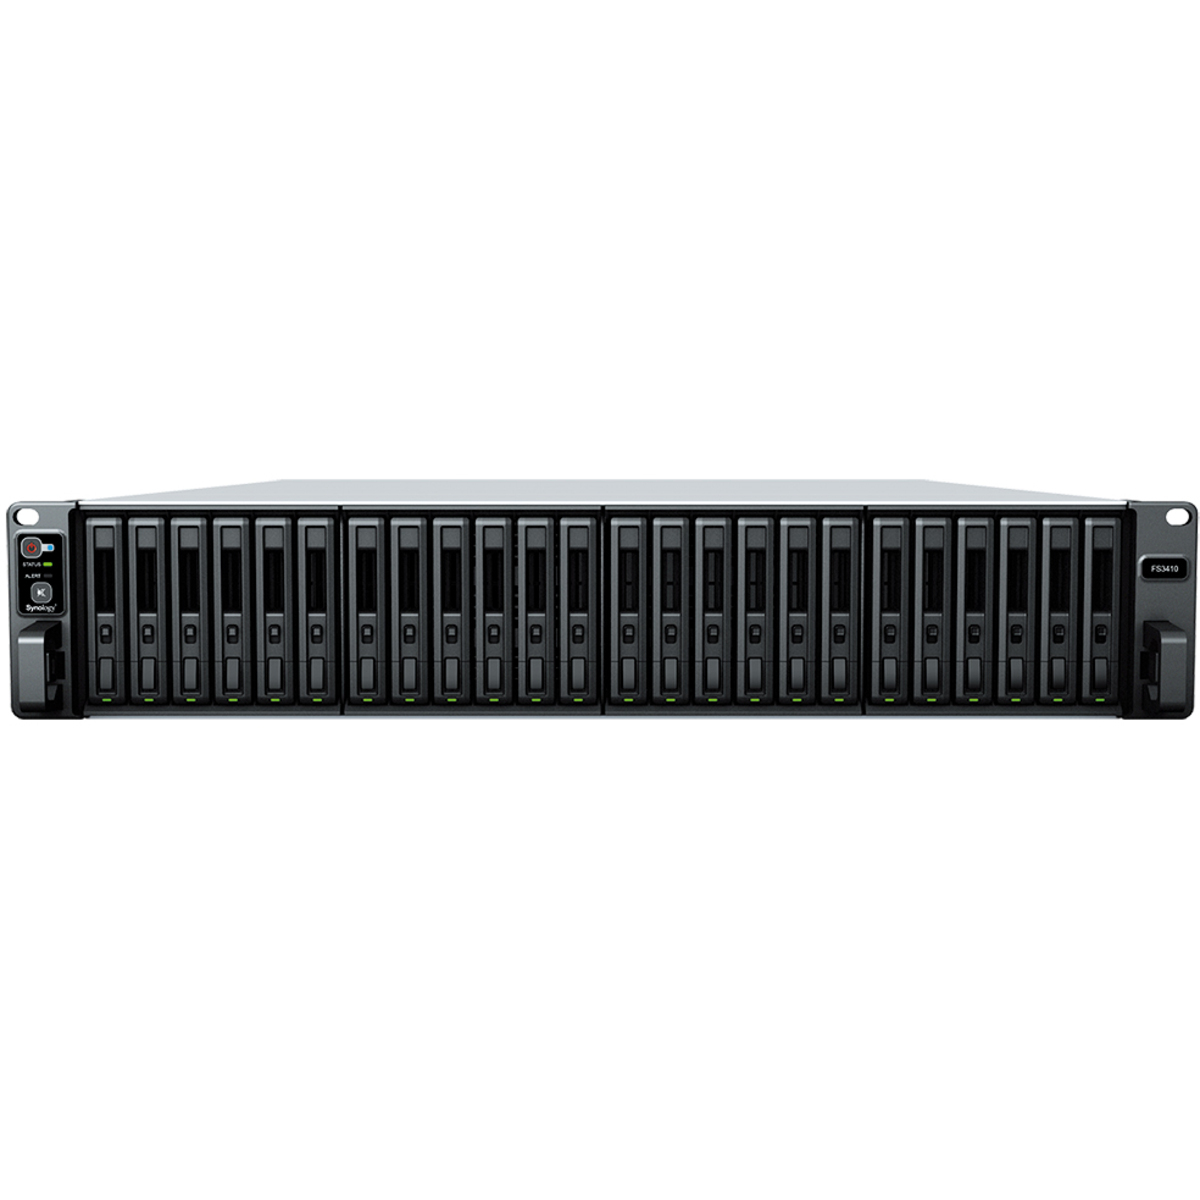 Synology FlashStation FS3410 17tb 24-Bay RackMount Large Business / Enterprise NAS - Network Attached Storage Device 17x1tb Crucial MX500 CT1000MX500SSD1 2.5 560/510MB/s SATA 6Gb/s SSD CONSUMER Class Drives Installed - Burn-In Tested FlashStation FS3410